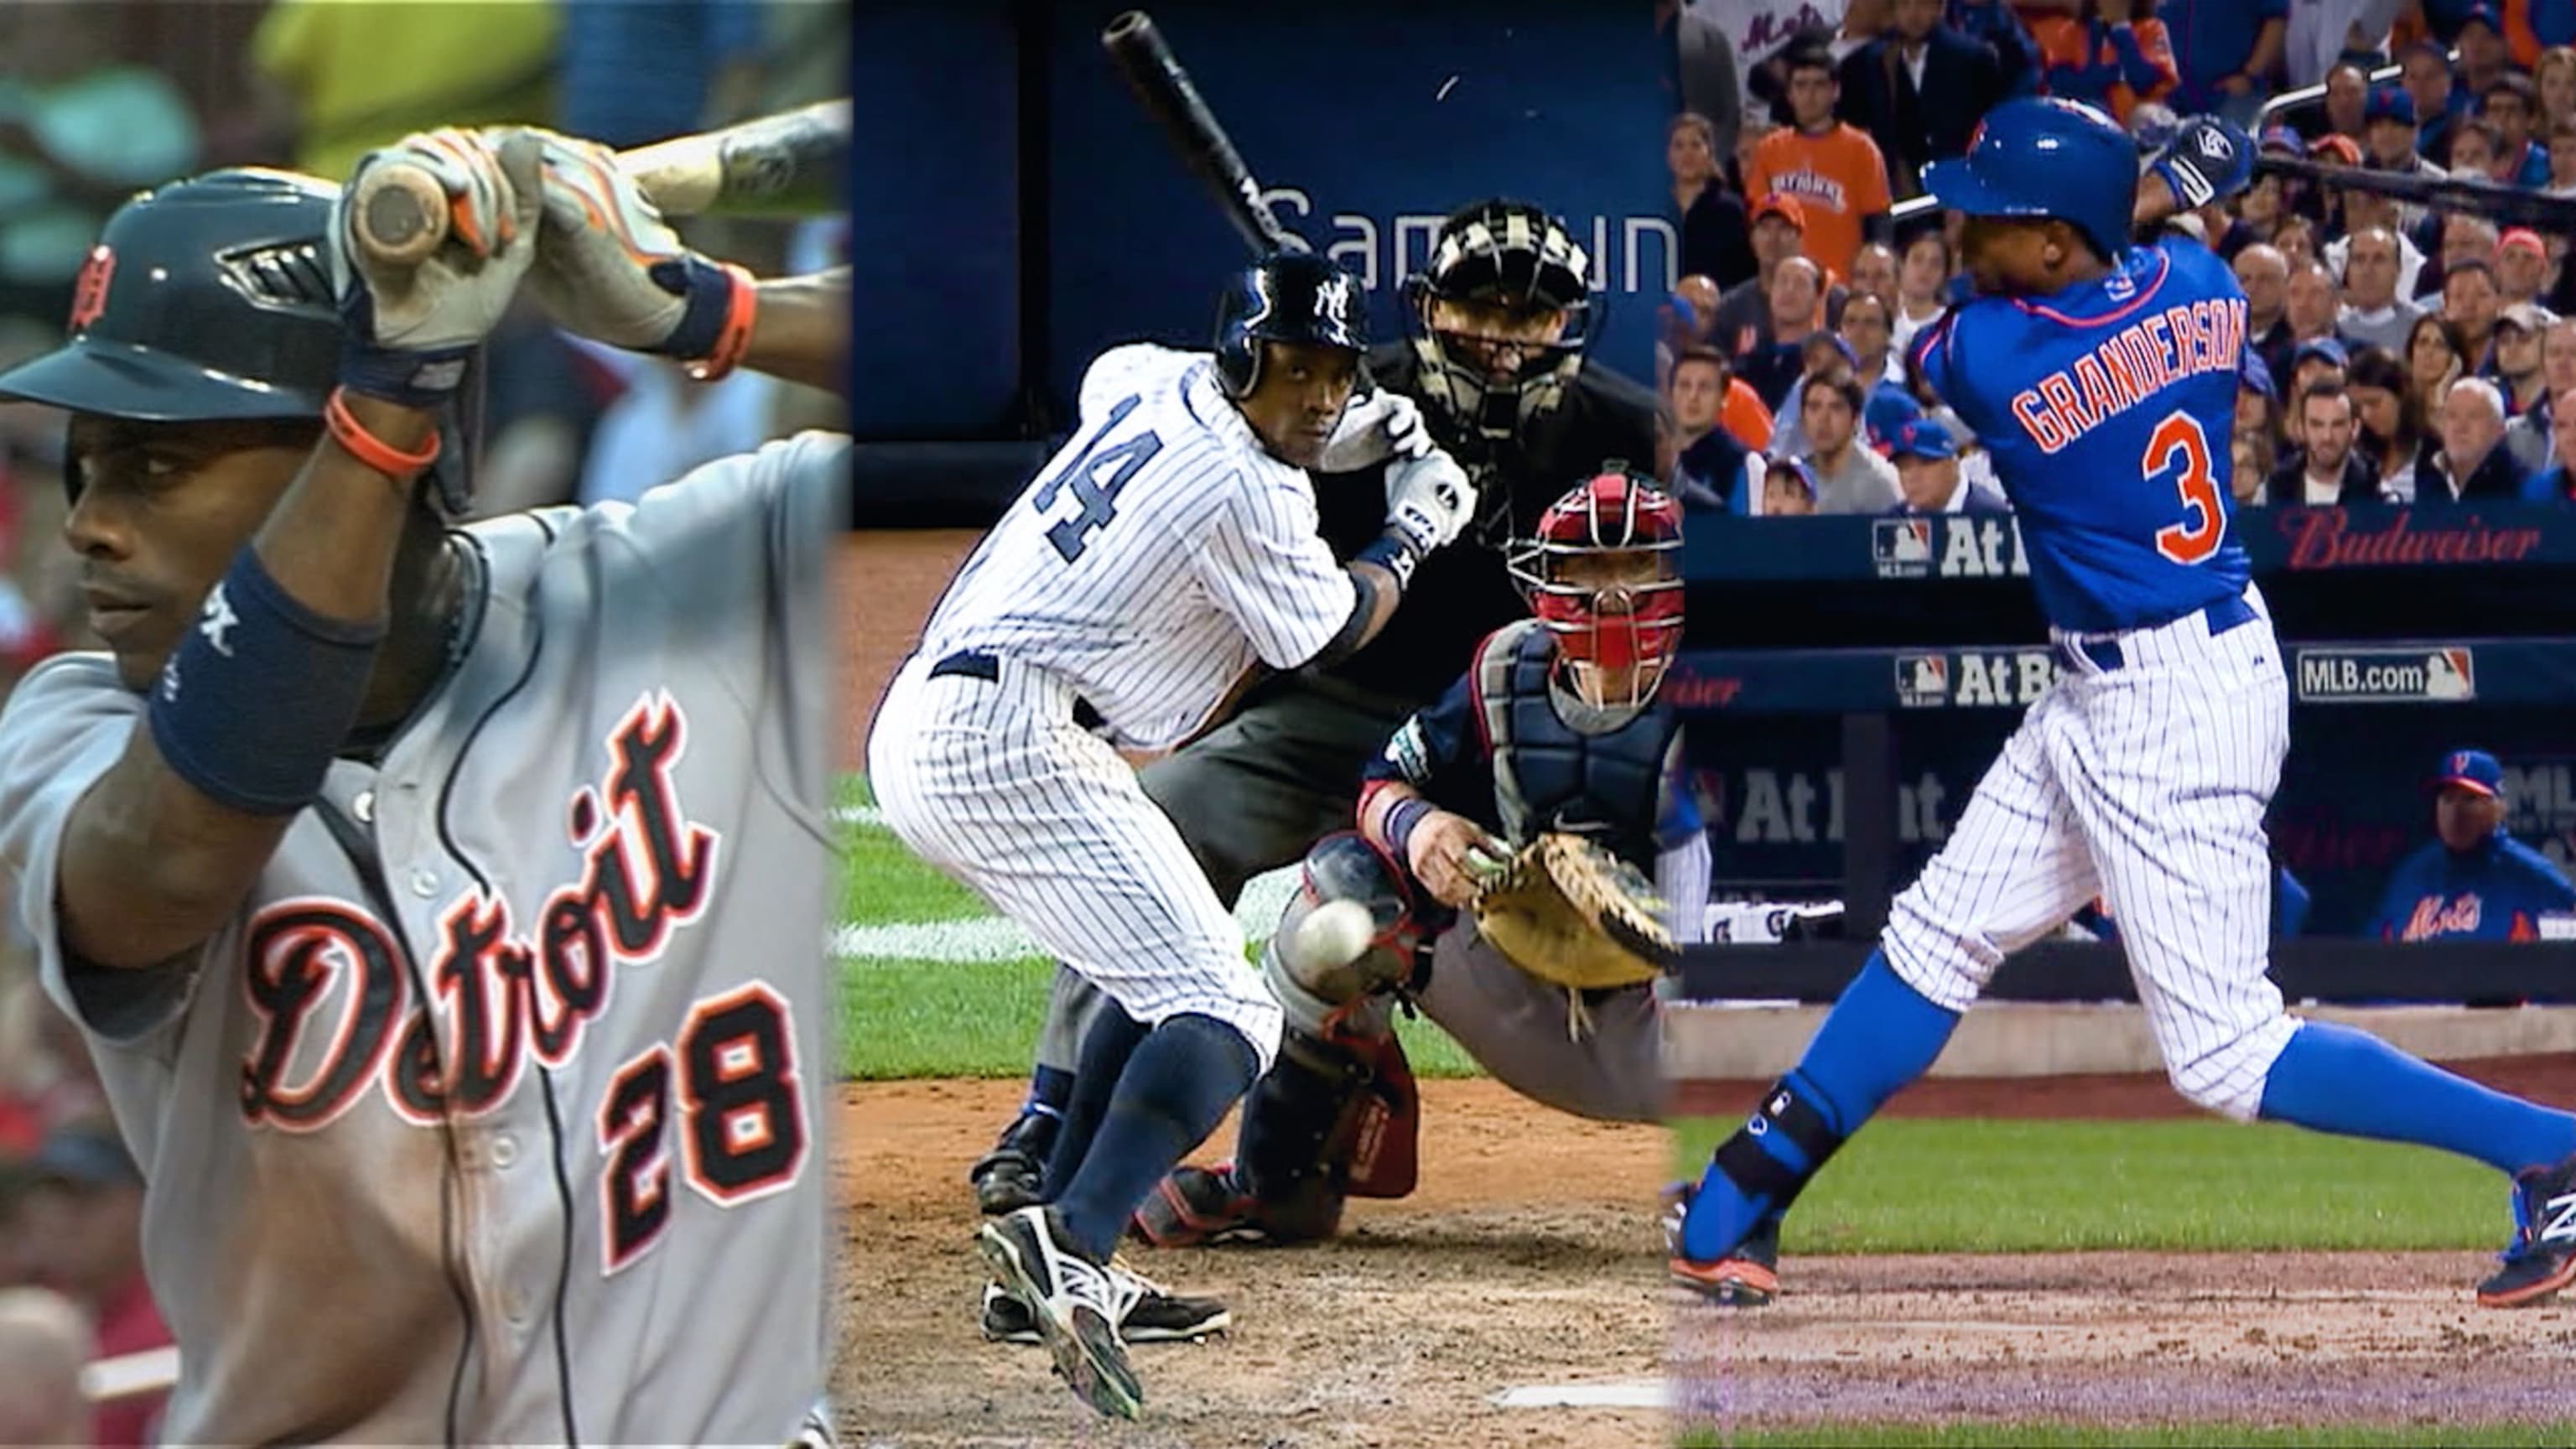 Curtis Granderson retirement: 2007 was the beginning of something